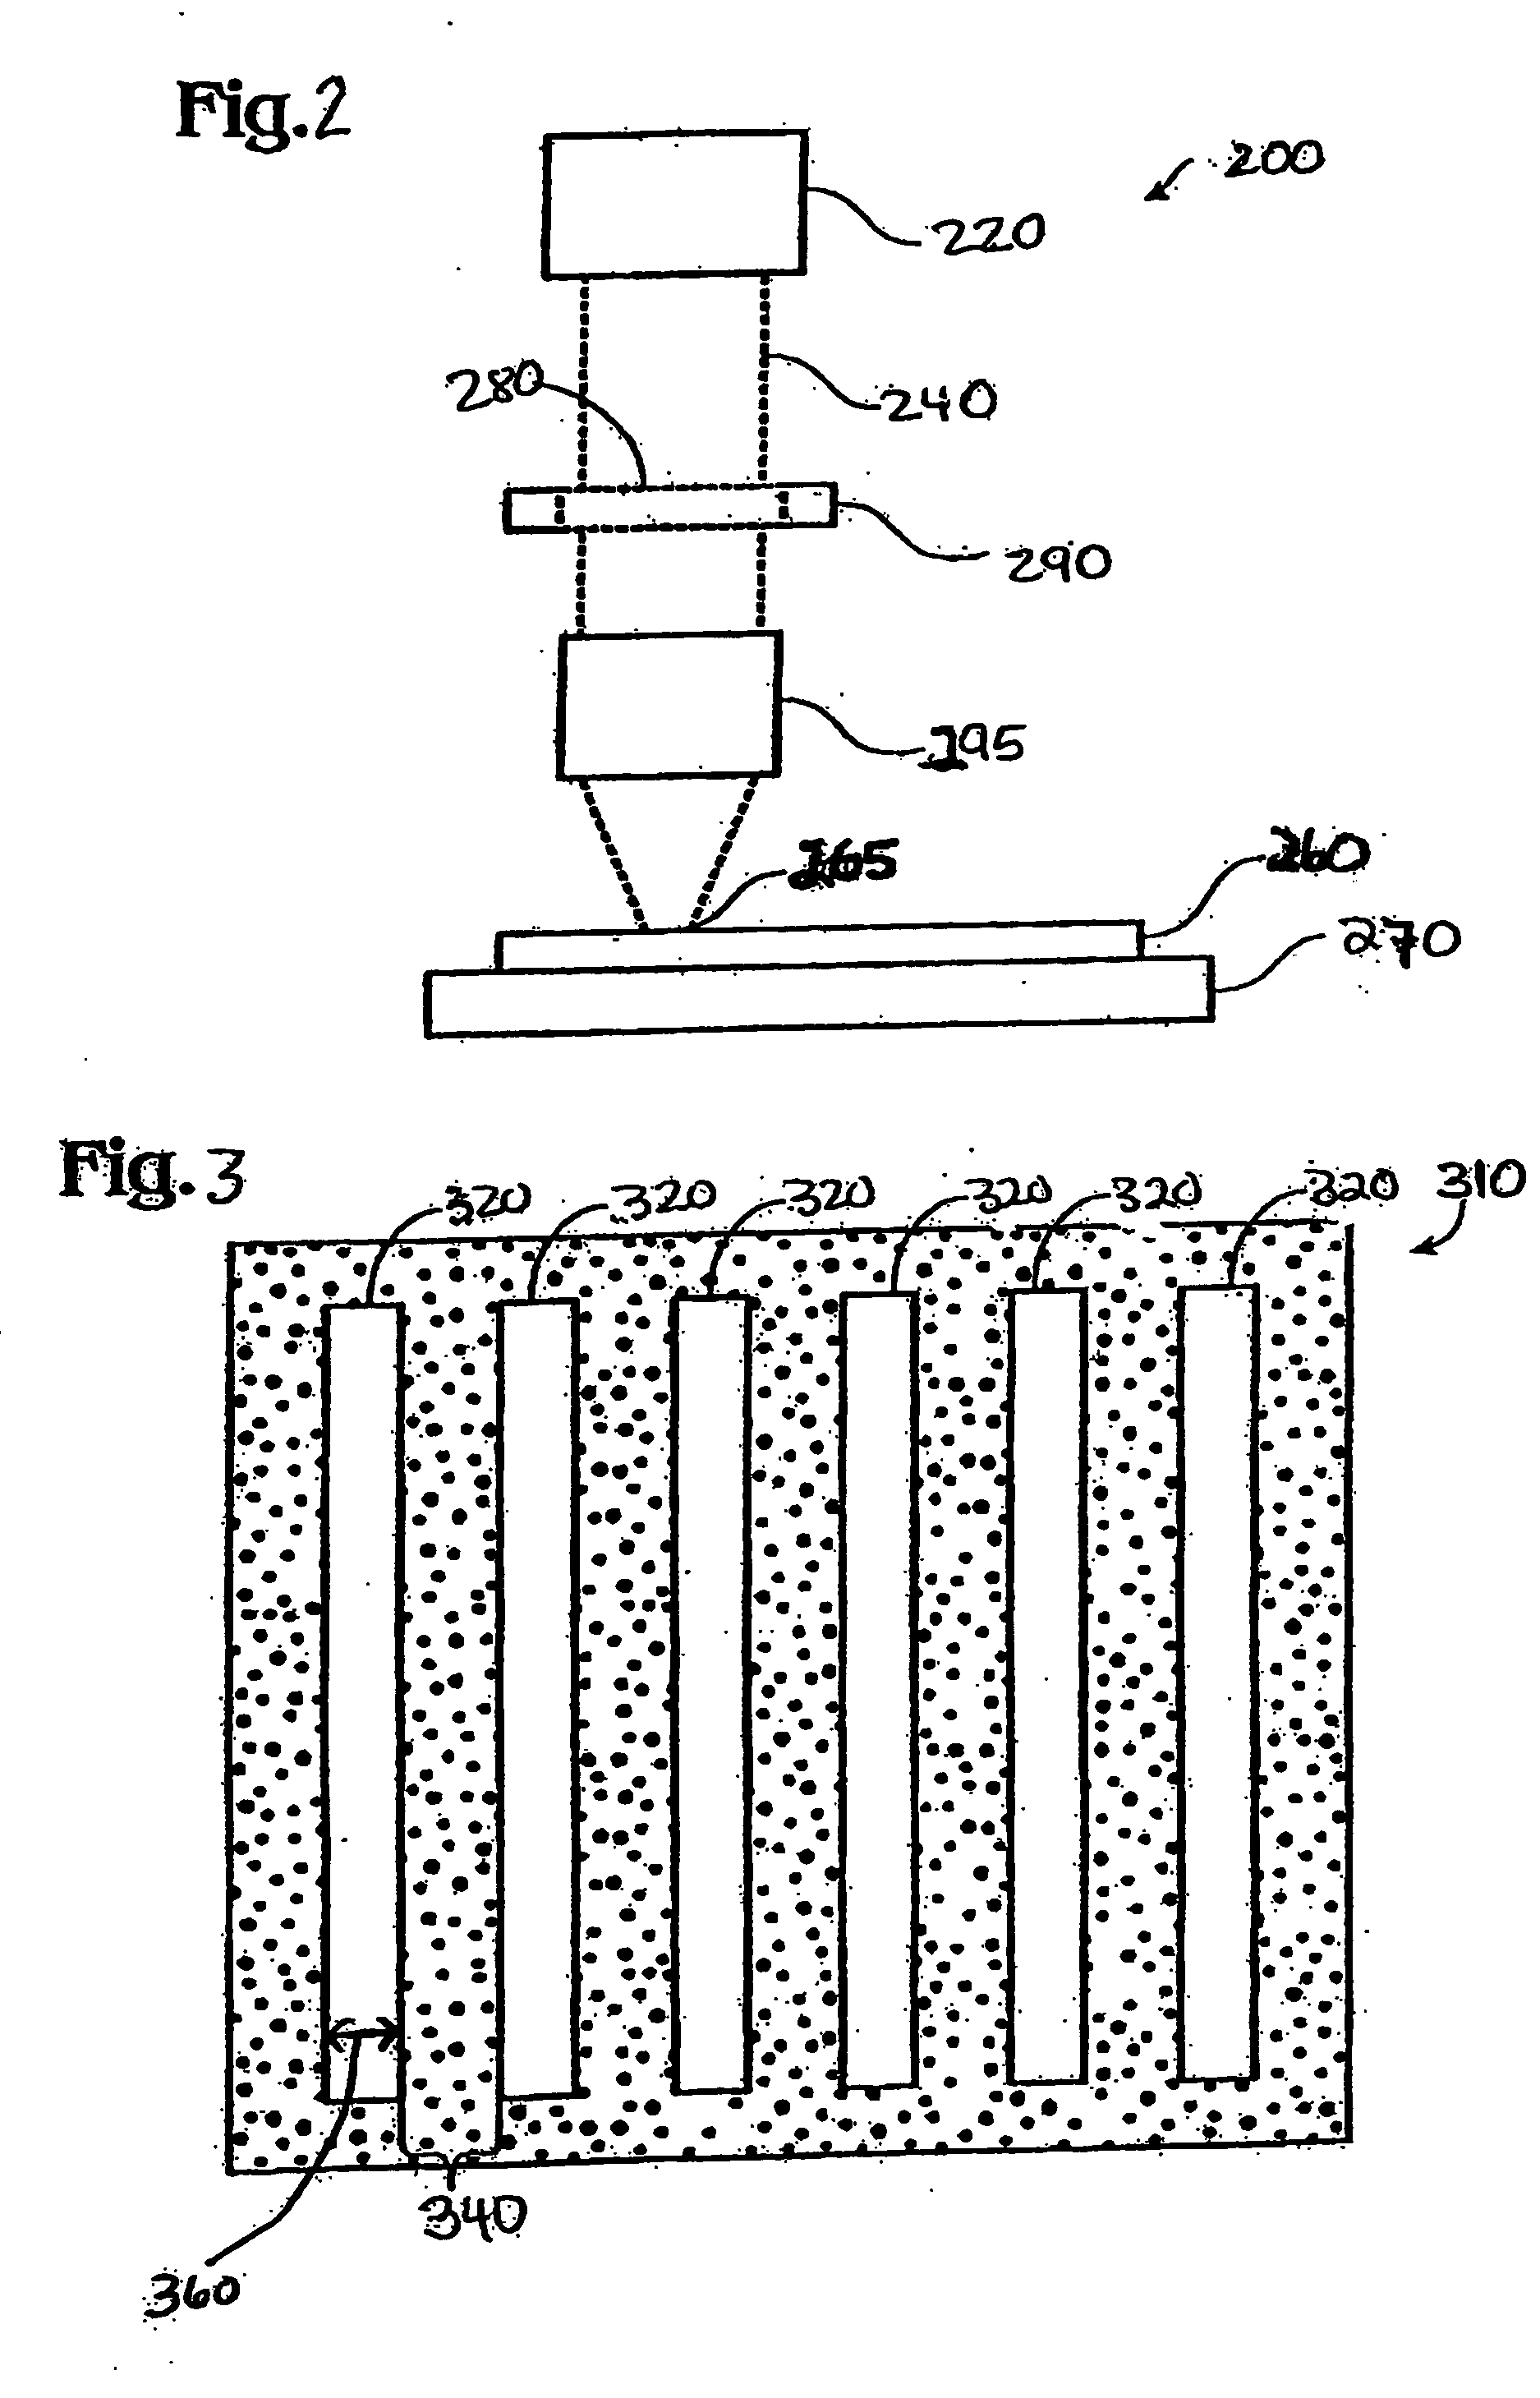 Systems and methods for inducing crystallization of thin films using multiple optical paths